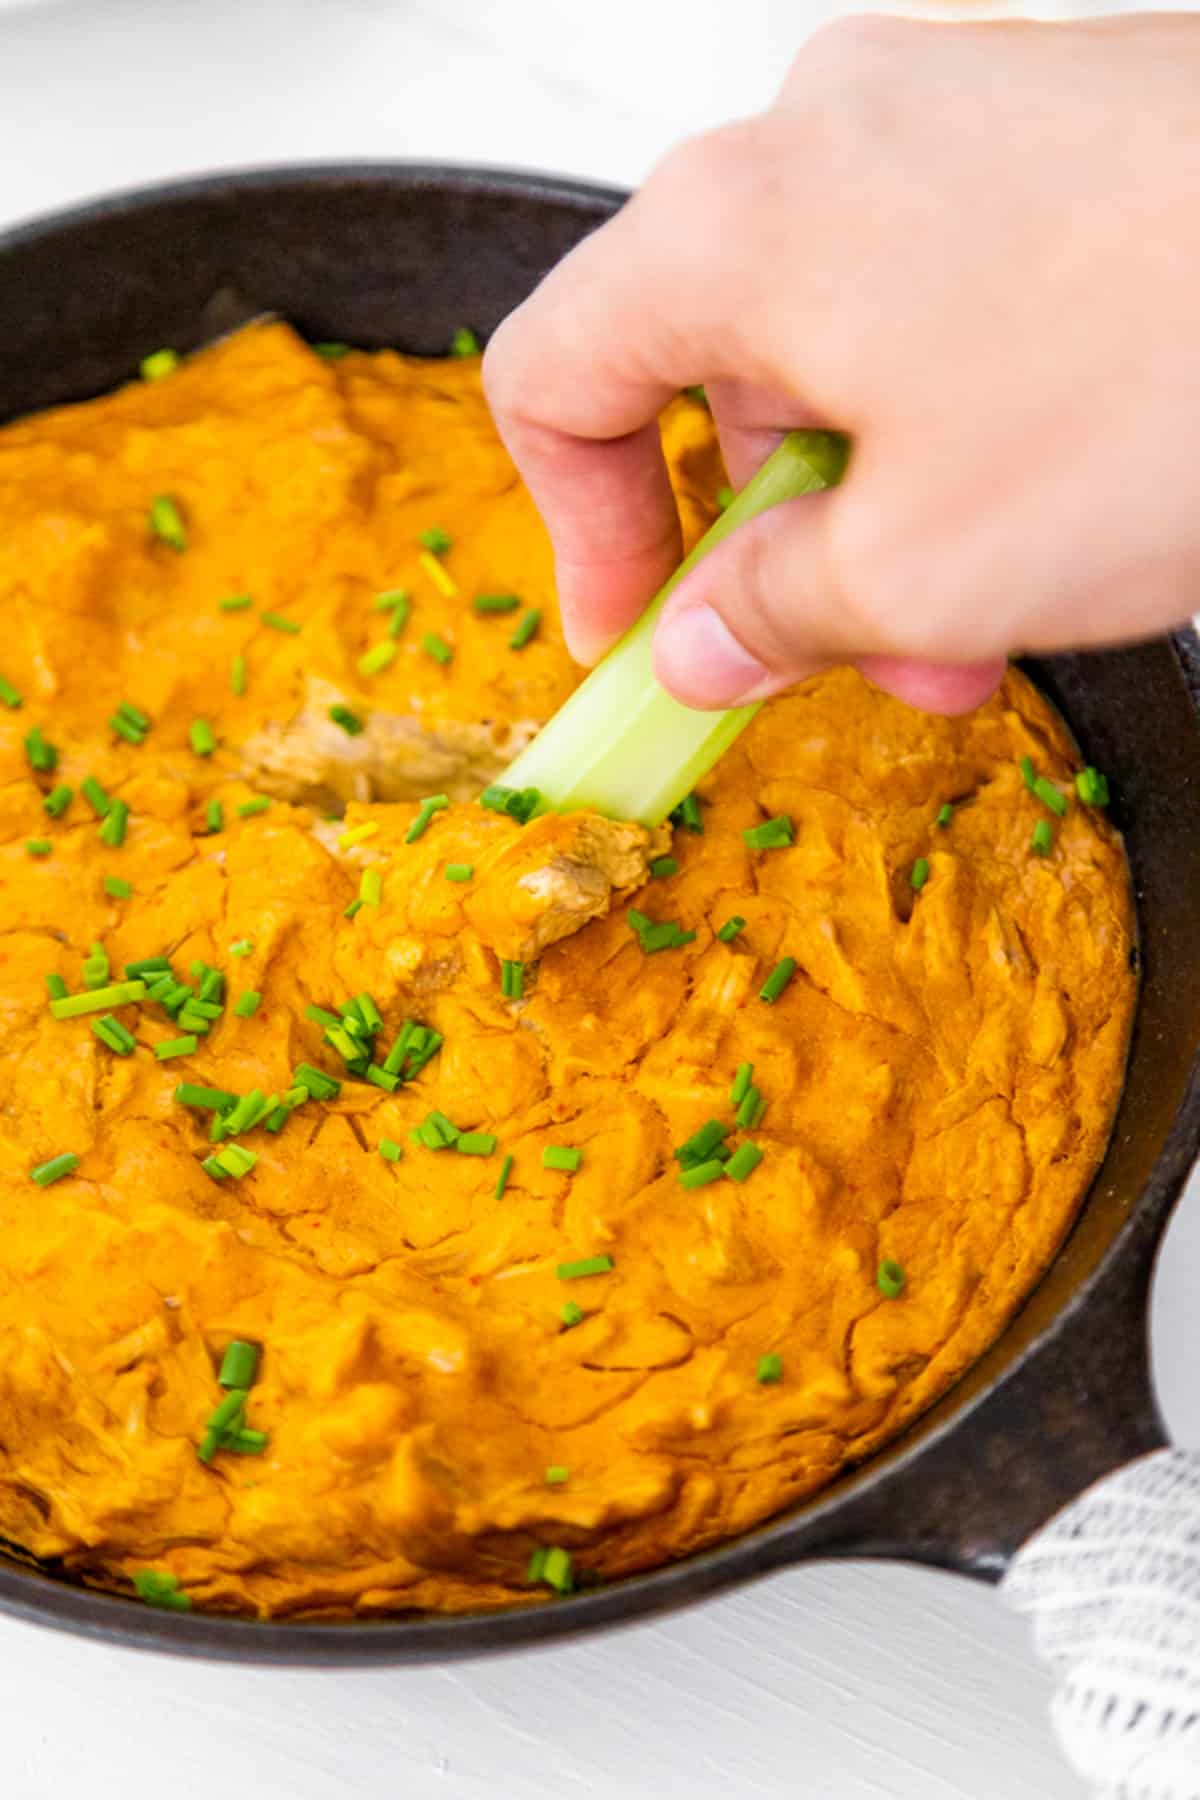 An iron skillet with buffalo chik'n dip and a hand dipping a stalk of celery in it.